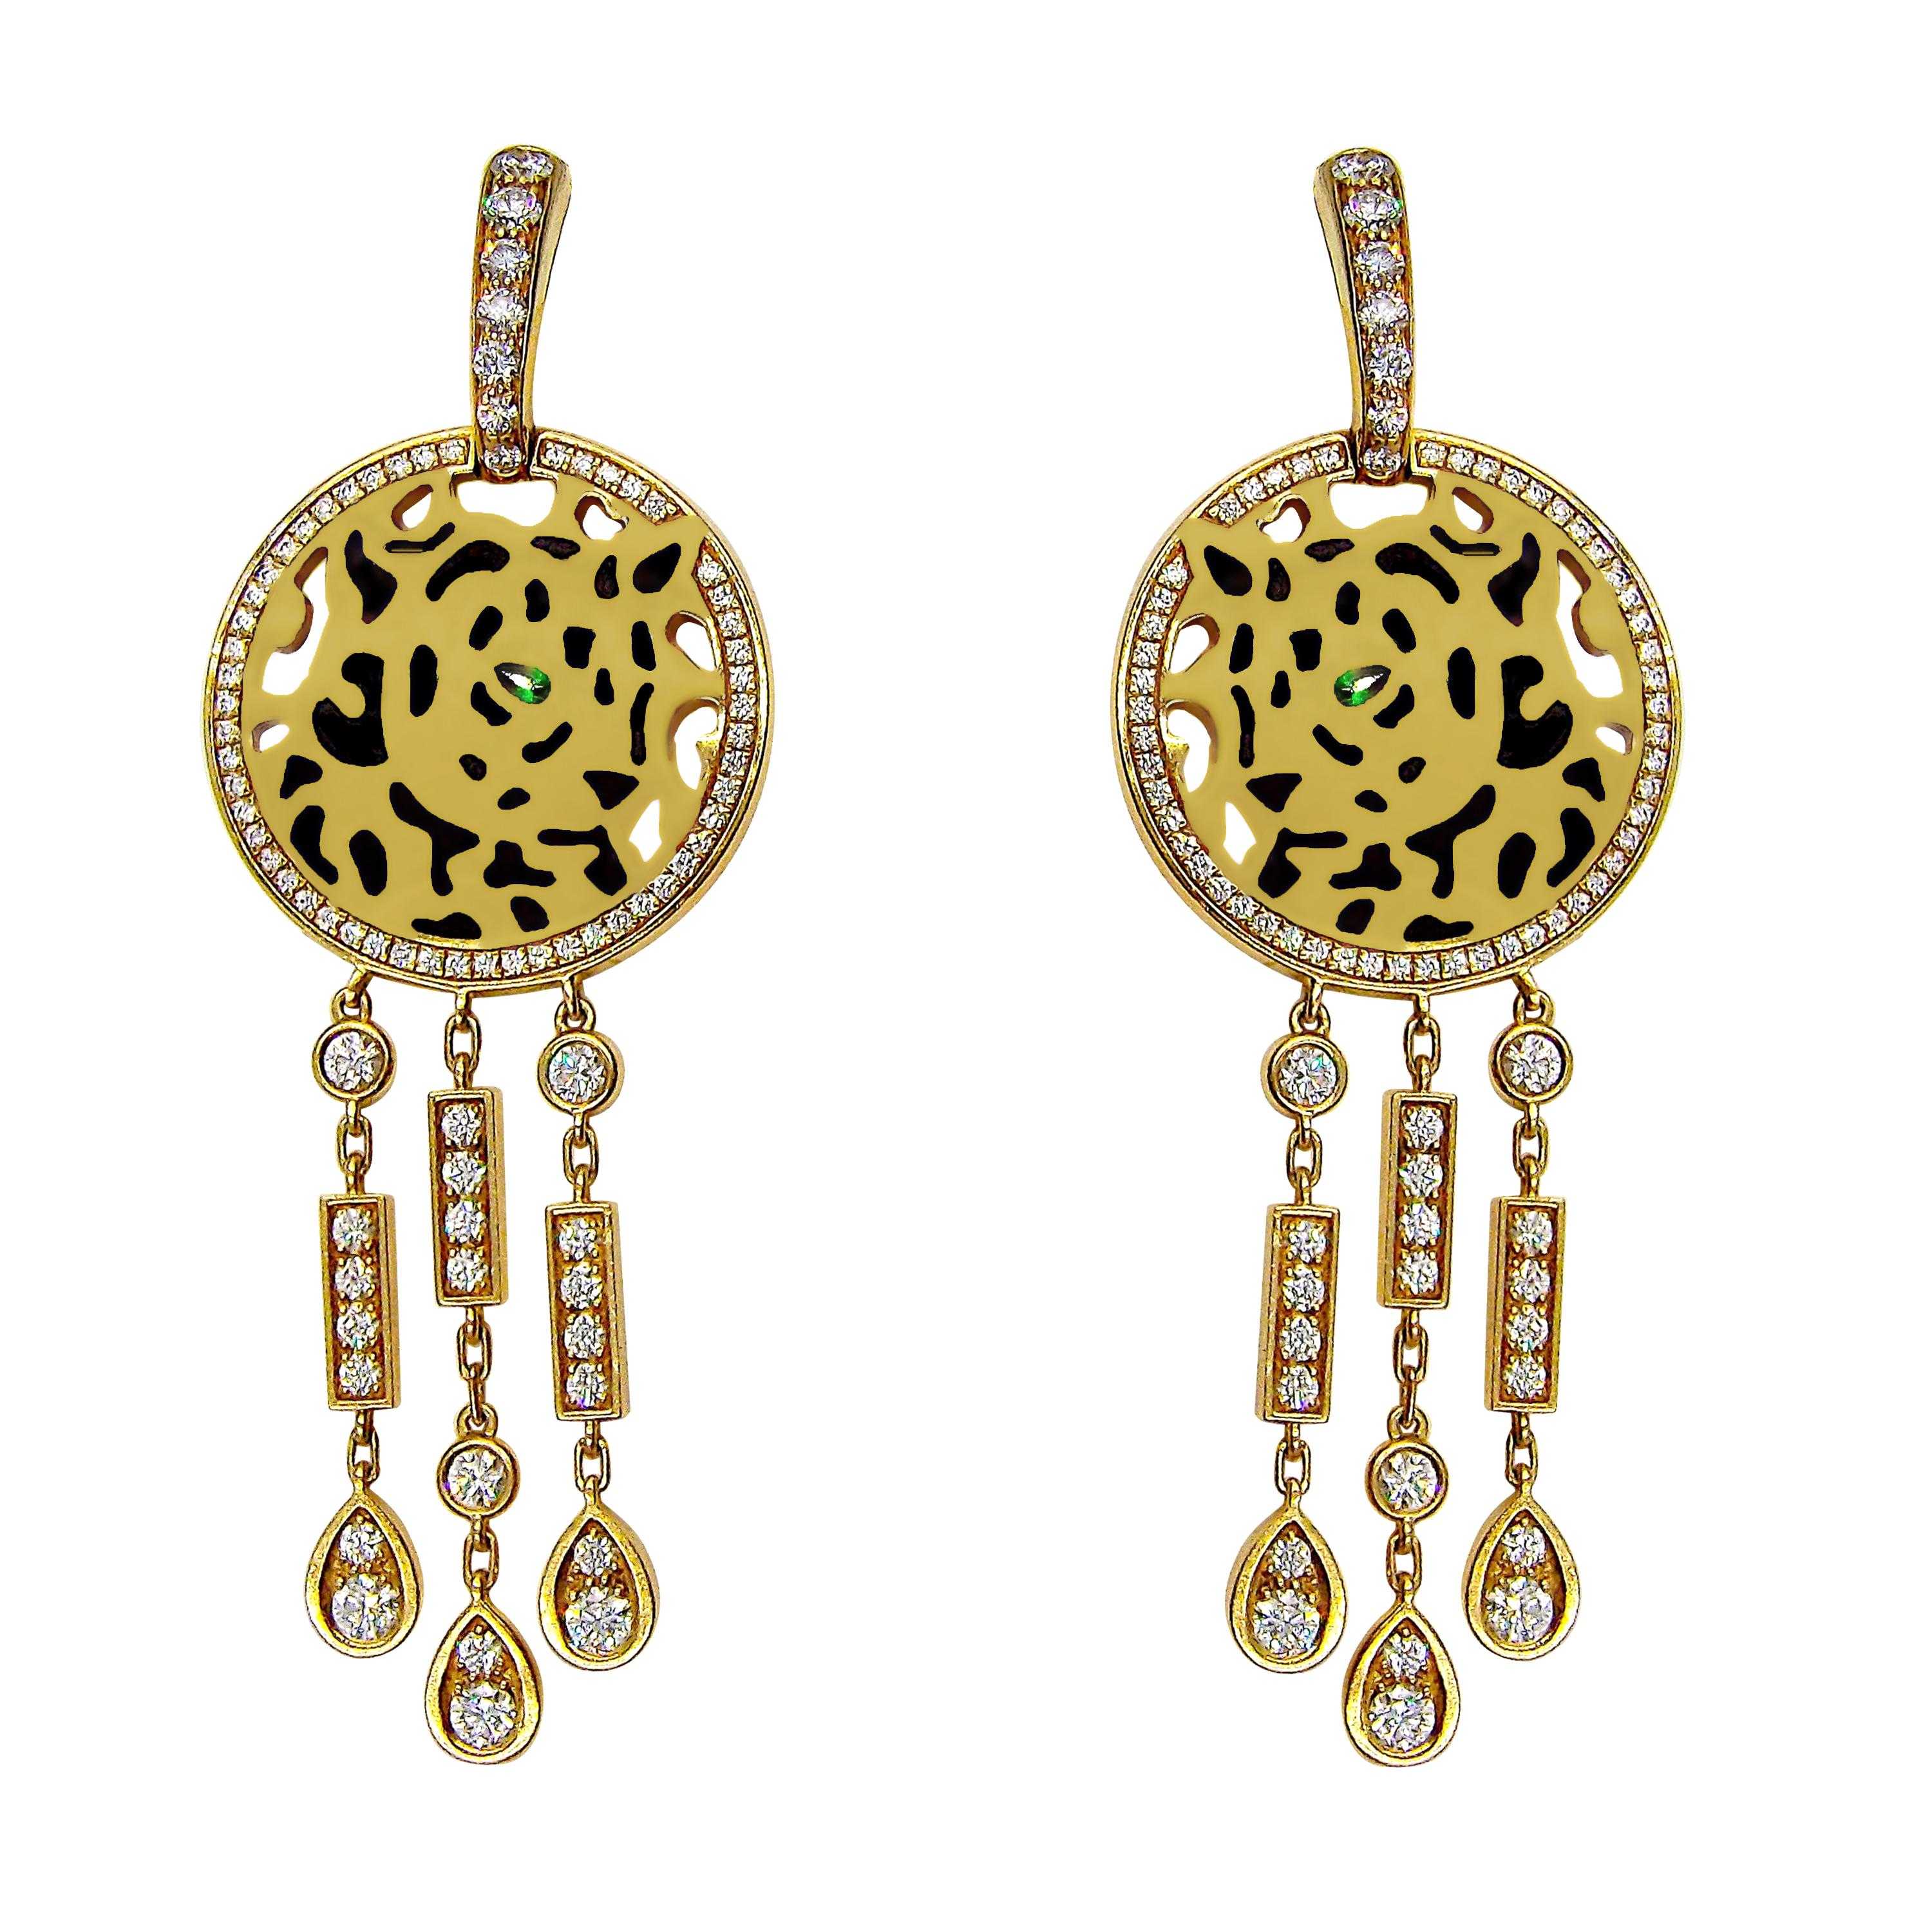 The Cartier Panthere Diamond Enamel Yellow Gold Earrings are a striking testament to Cartier's longstanding tradition of blending luxurious materials with artistic design. These earrings, a part of the revered Panthere collection, exhibit a